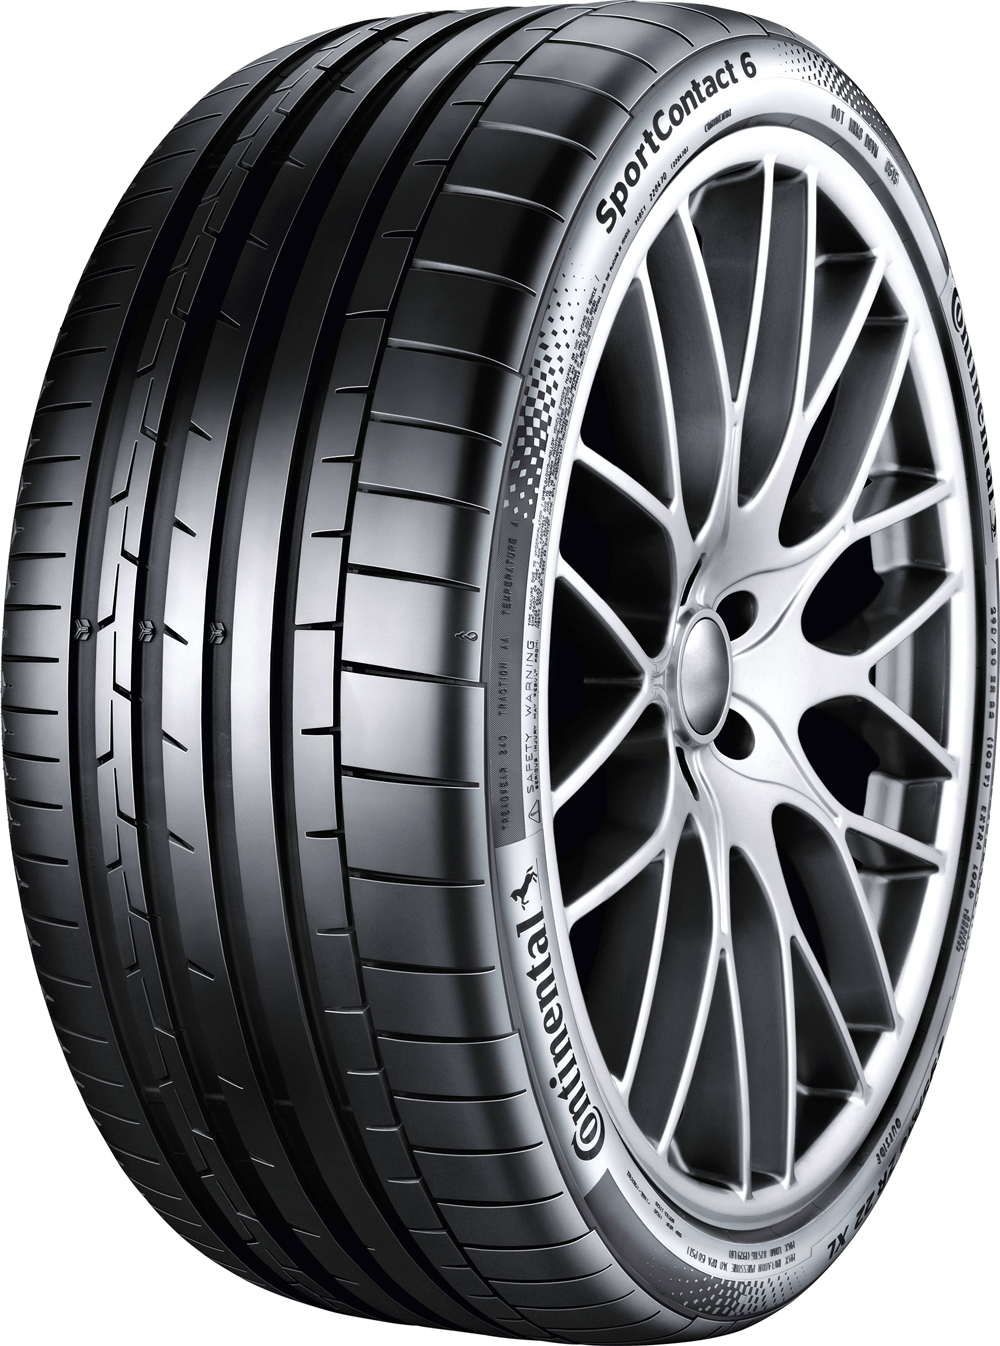 Гуми за кола CONTINENTAL SportContact 6 ContiSilent XL AUDI 275/30 R20 97Y